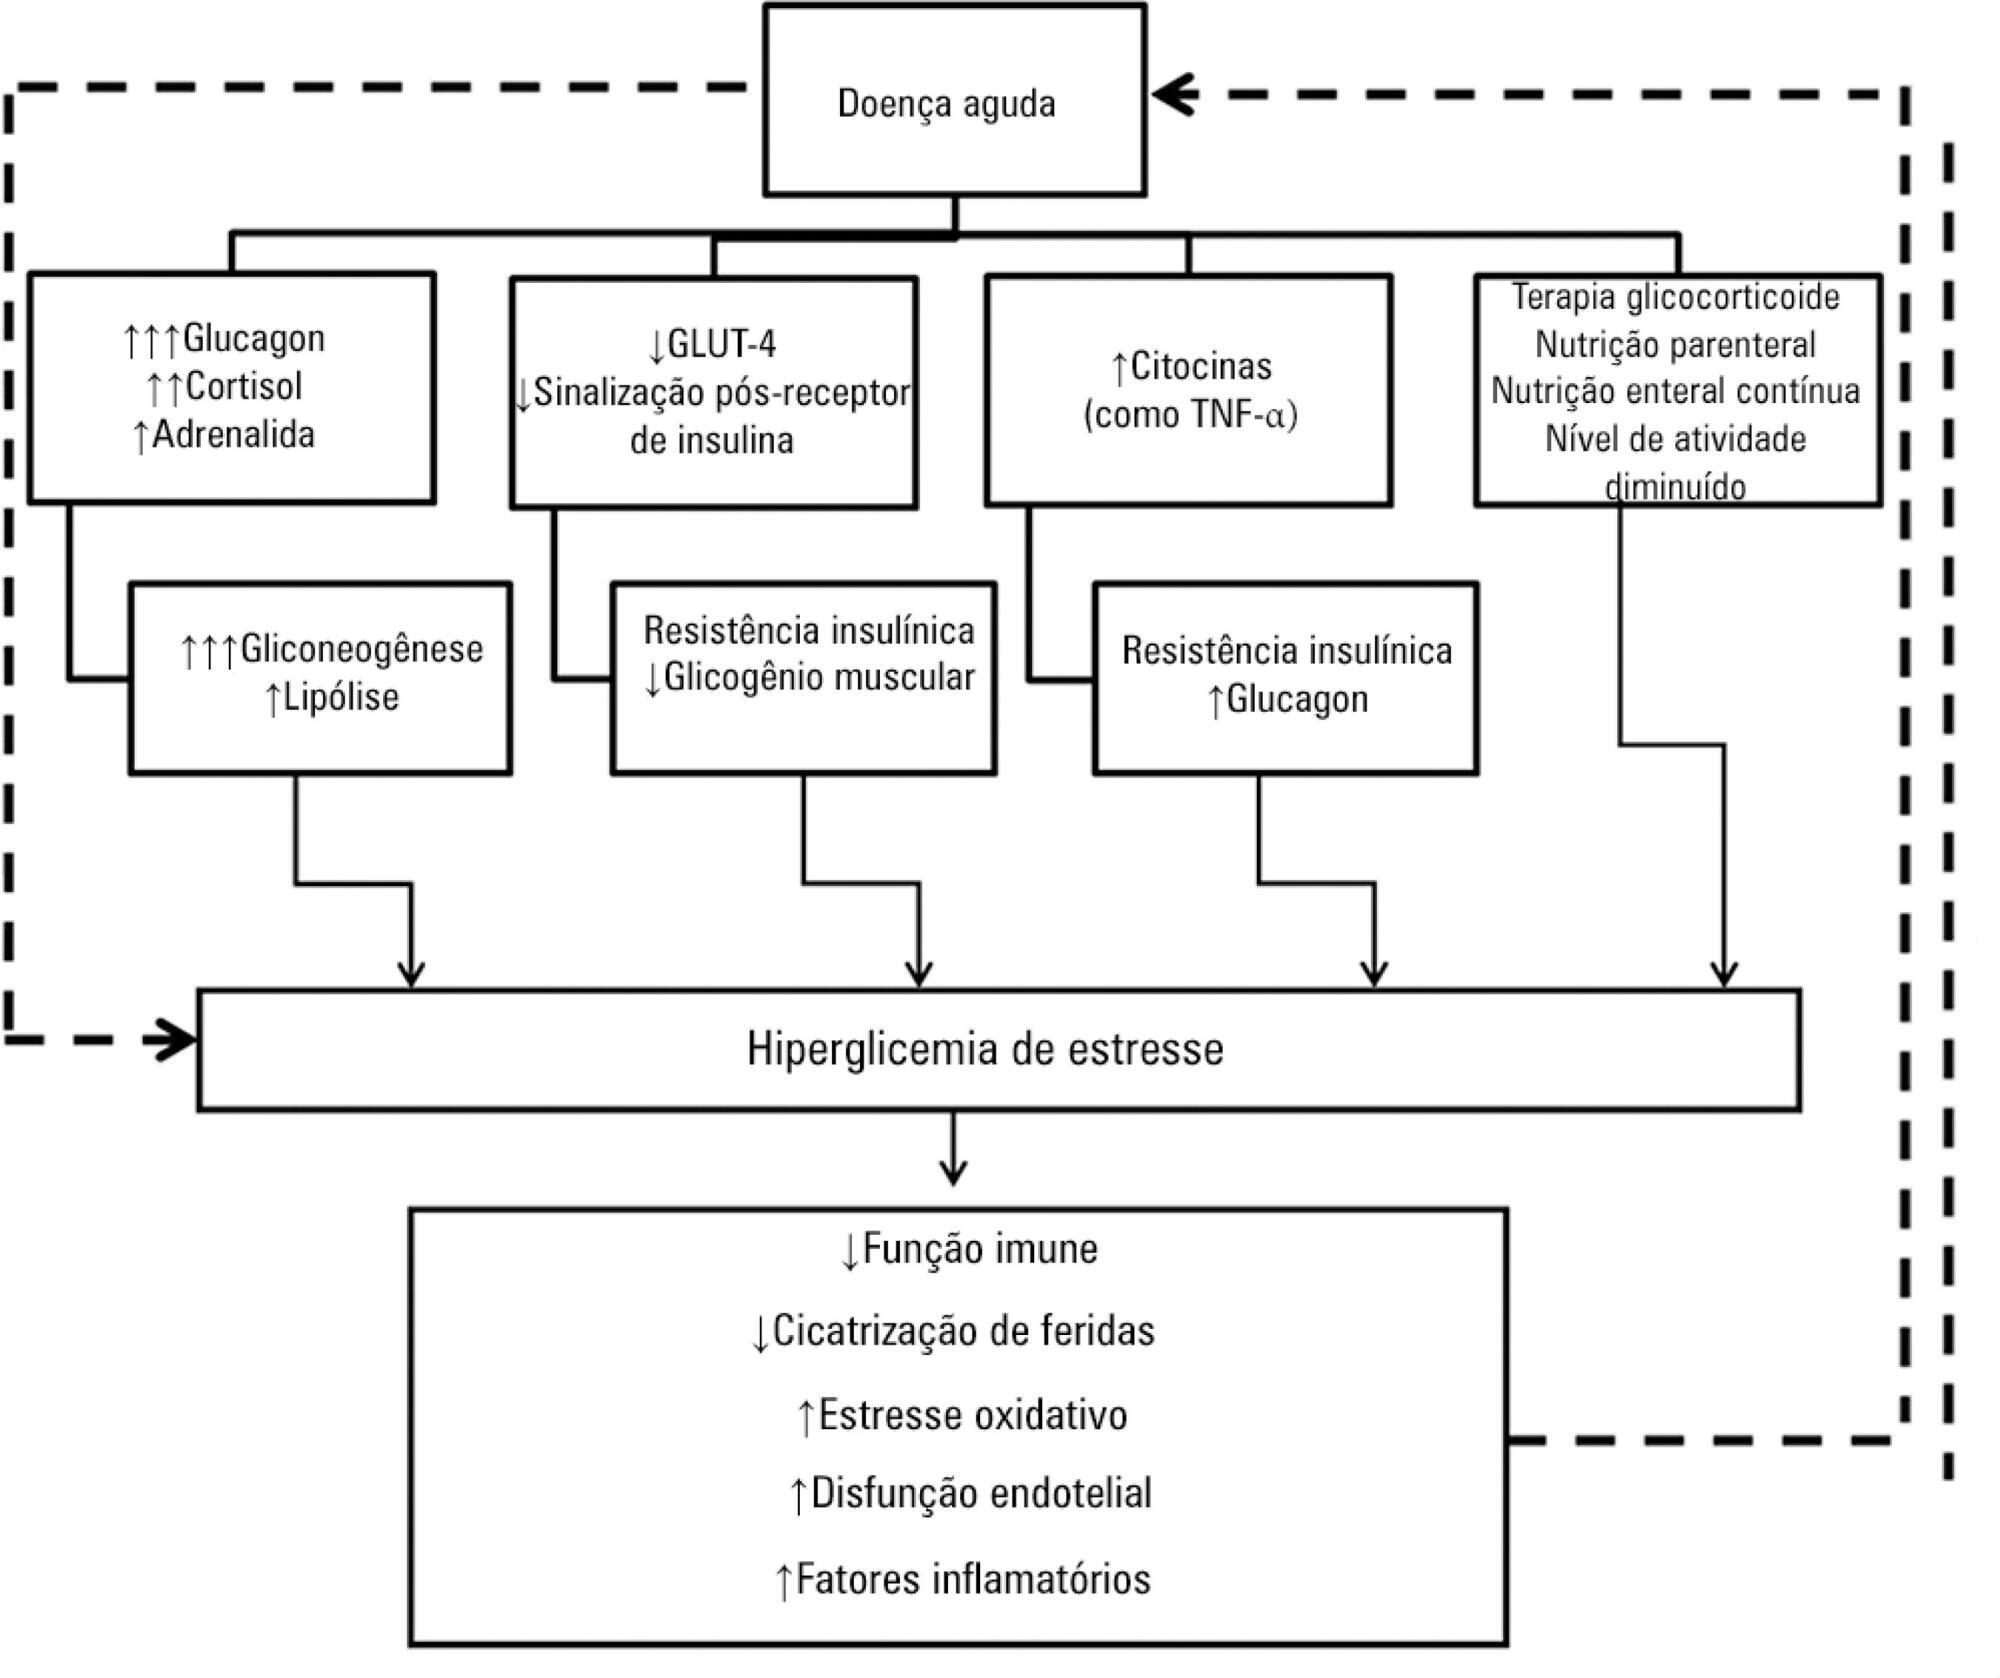 Assessment and treatment of hyperglycemia in critically ill
               patients